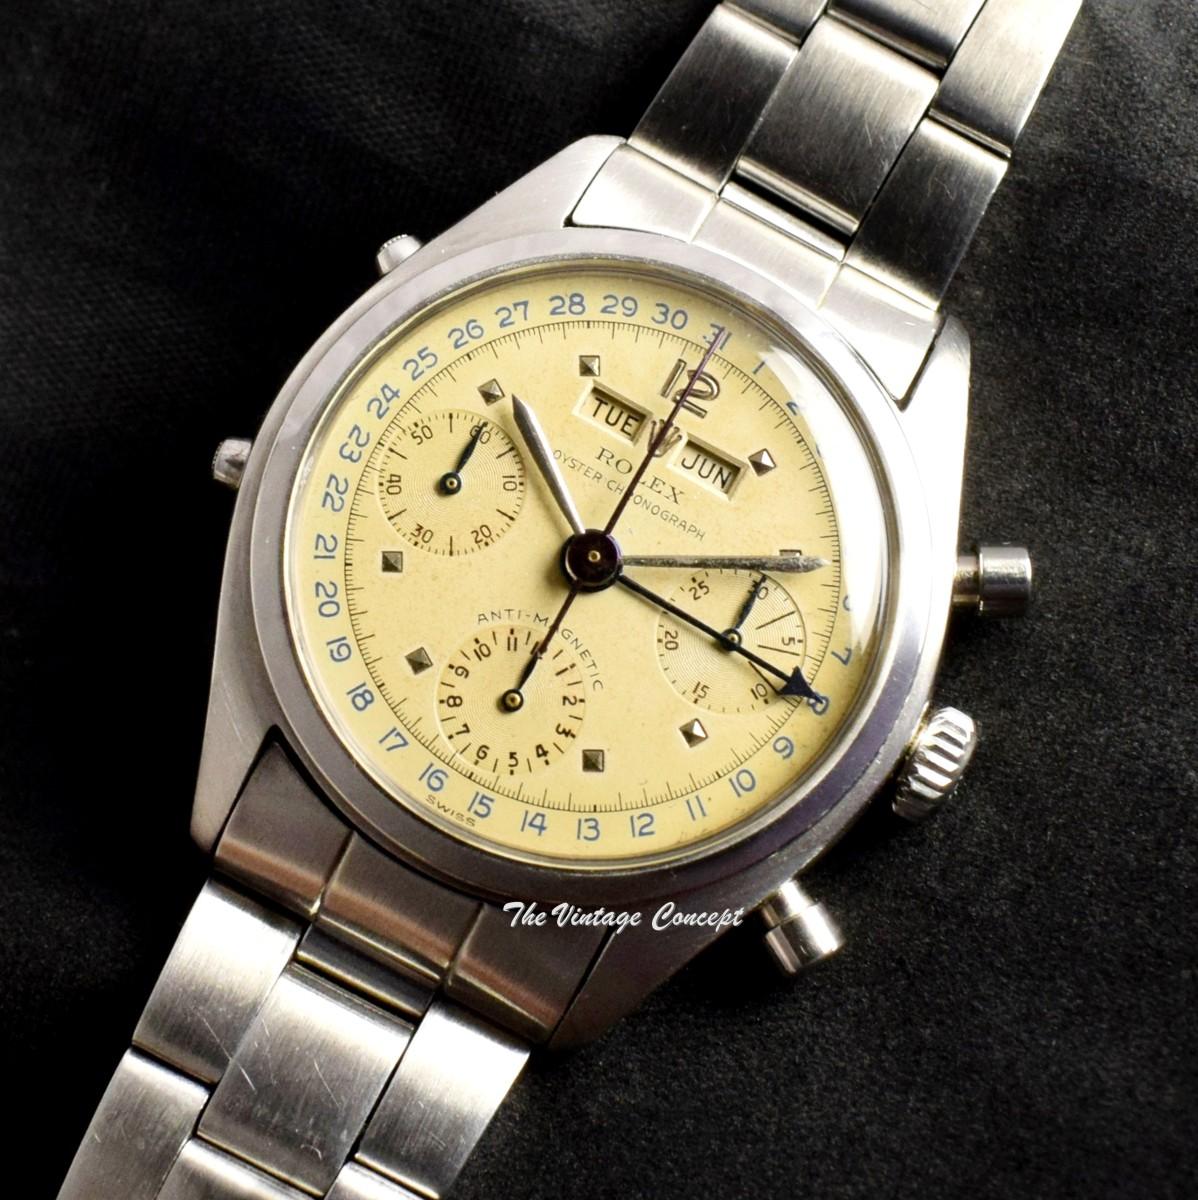 Rolex Killy Triple Date Calendar Chronograph Stainless Steel Creamy Dial 6036